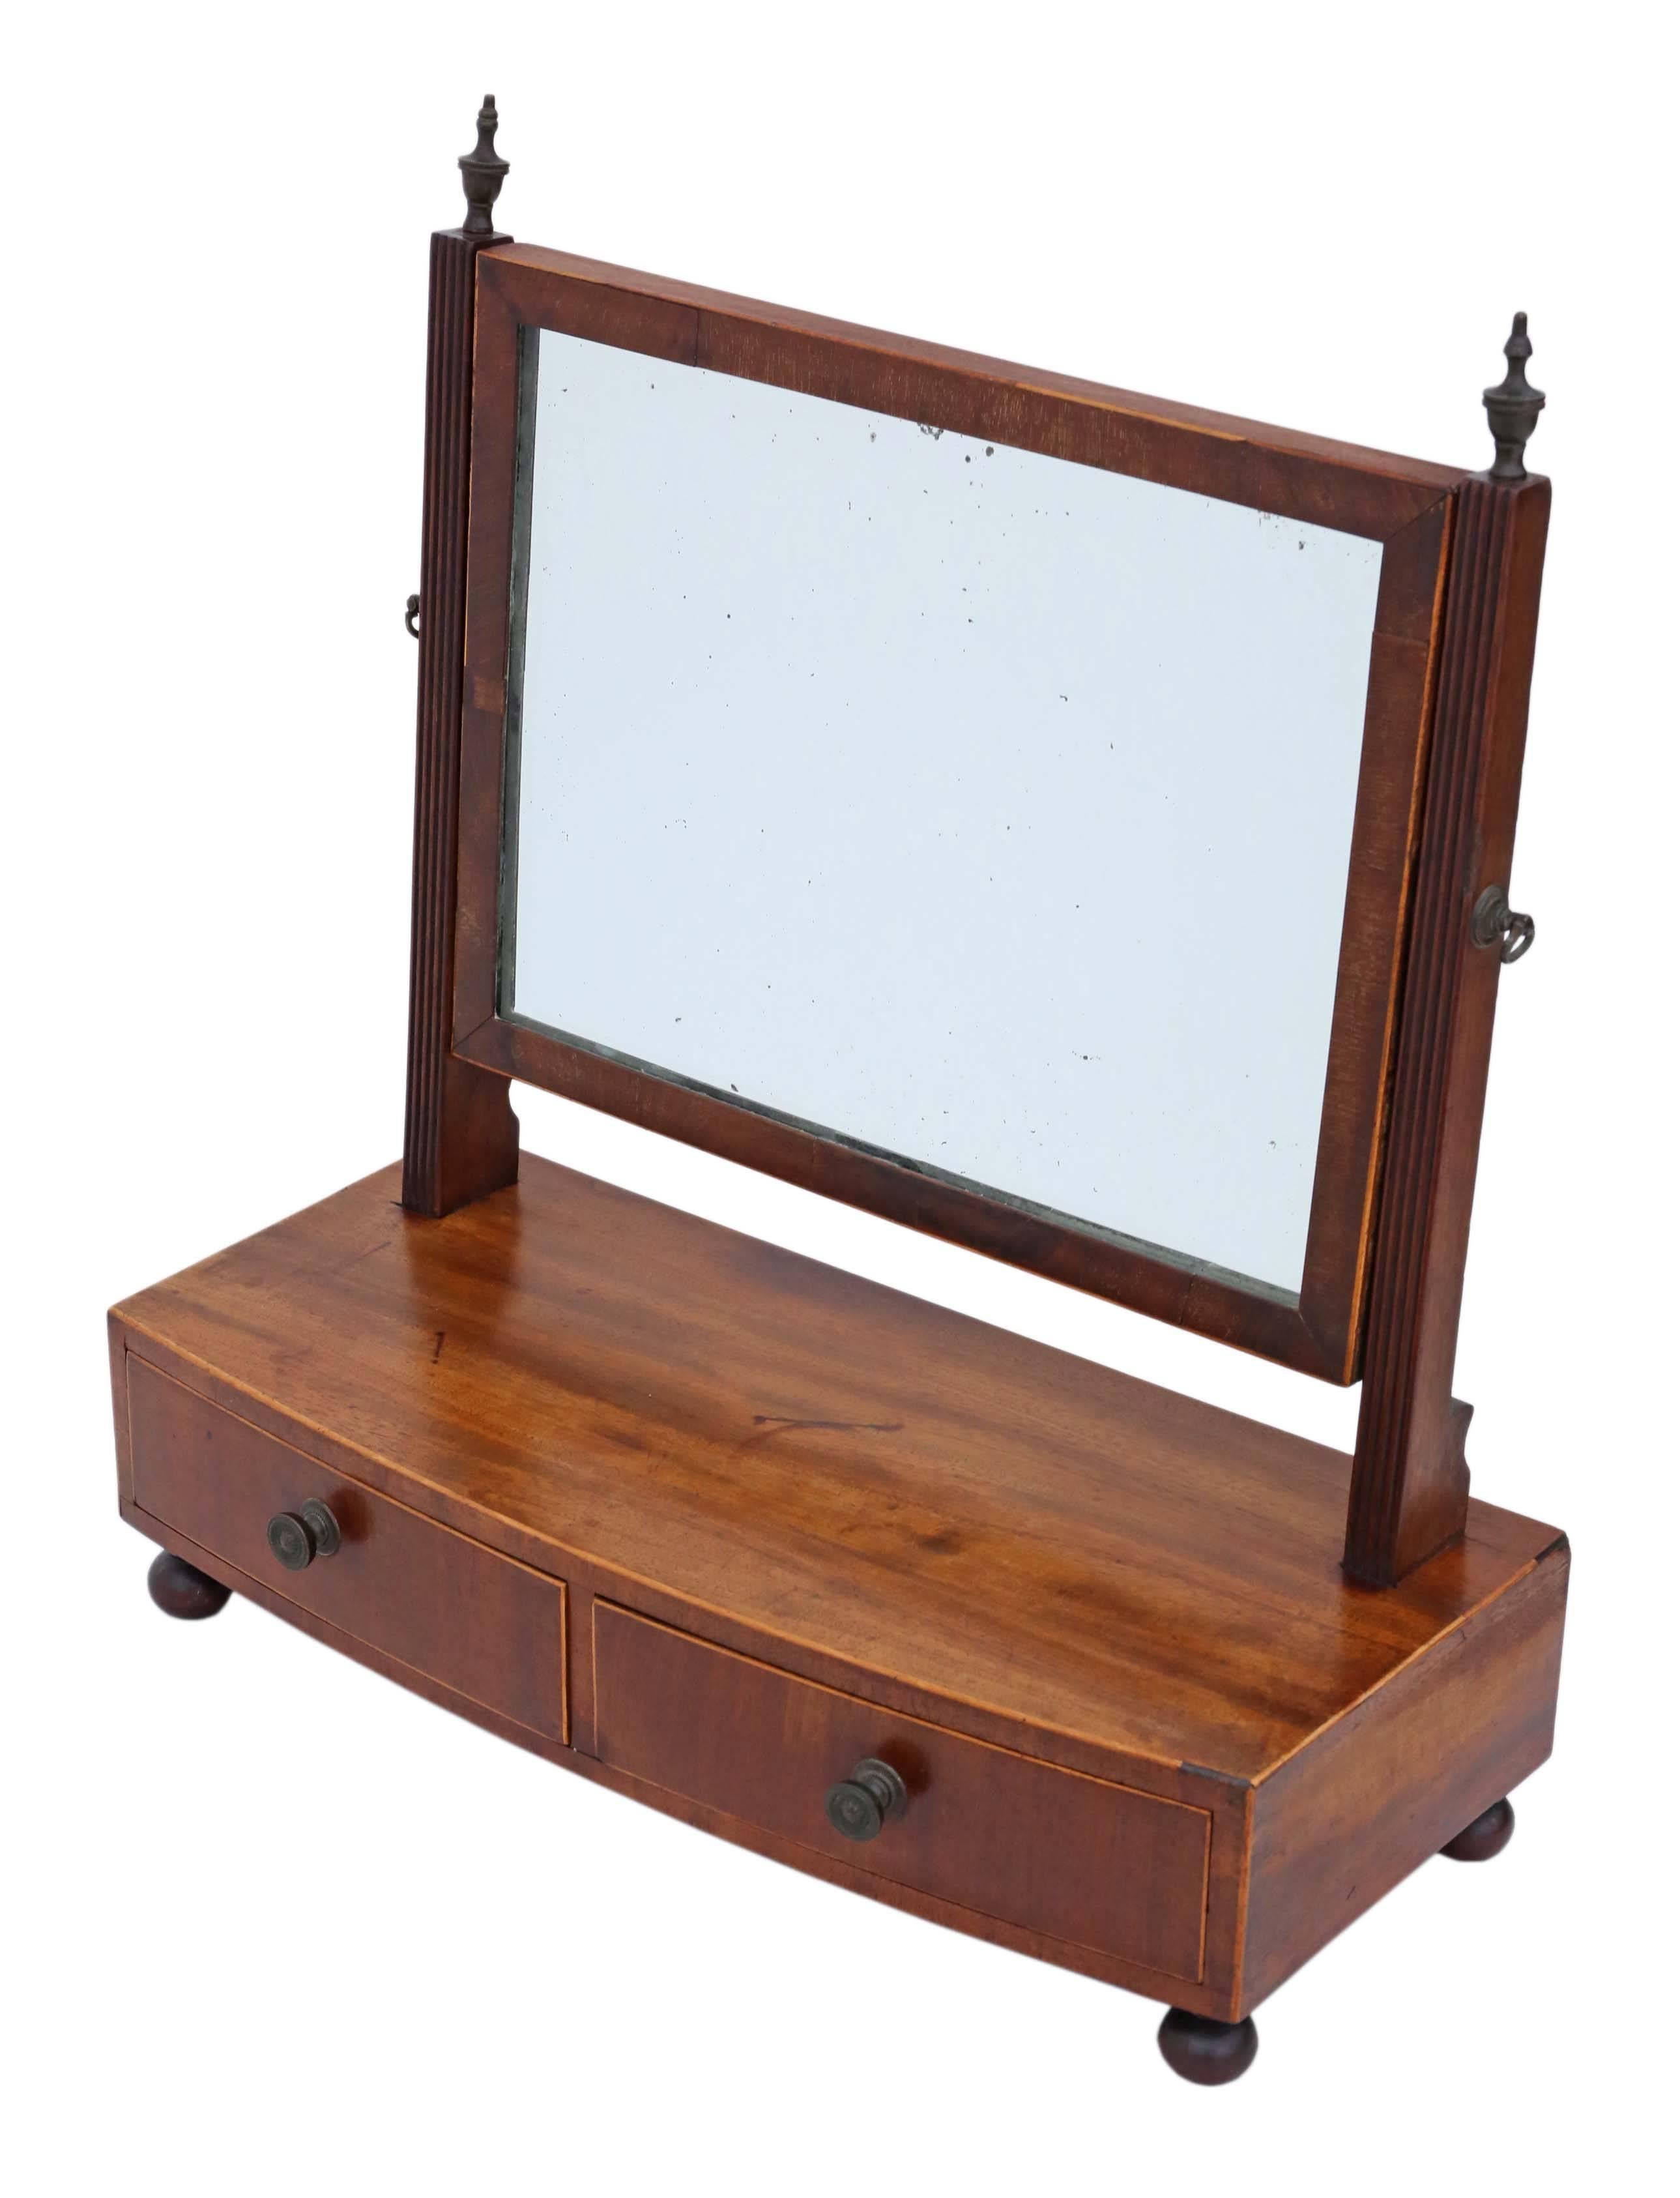 Antique quality Regency, circa 1825 mahogany swing dressing table mirror.

This is a lovely mirror, that is full of age and charm, with great proportions.

A rare find, that would look amazing in the right location.

The mahogany lined drawers